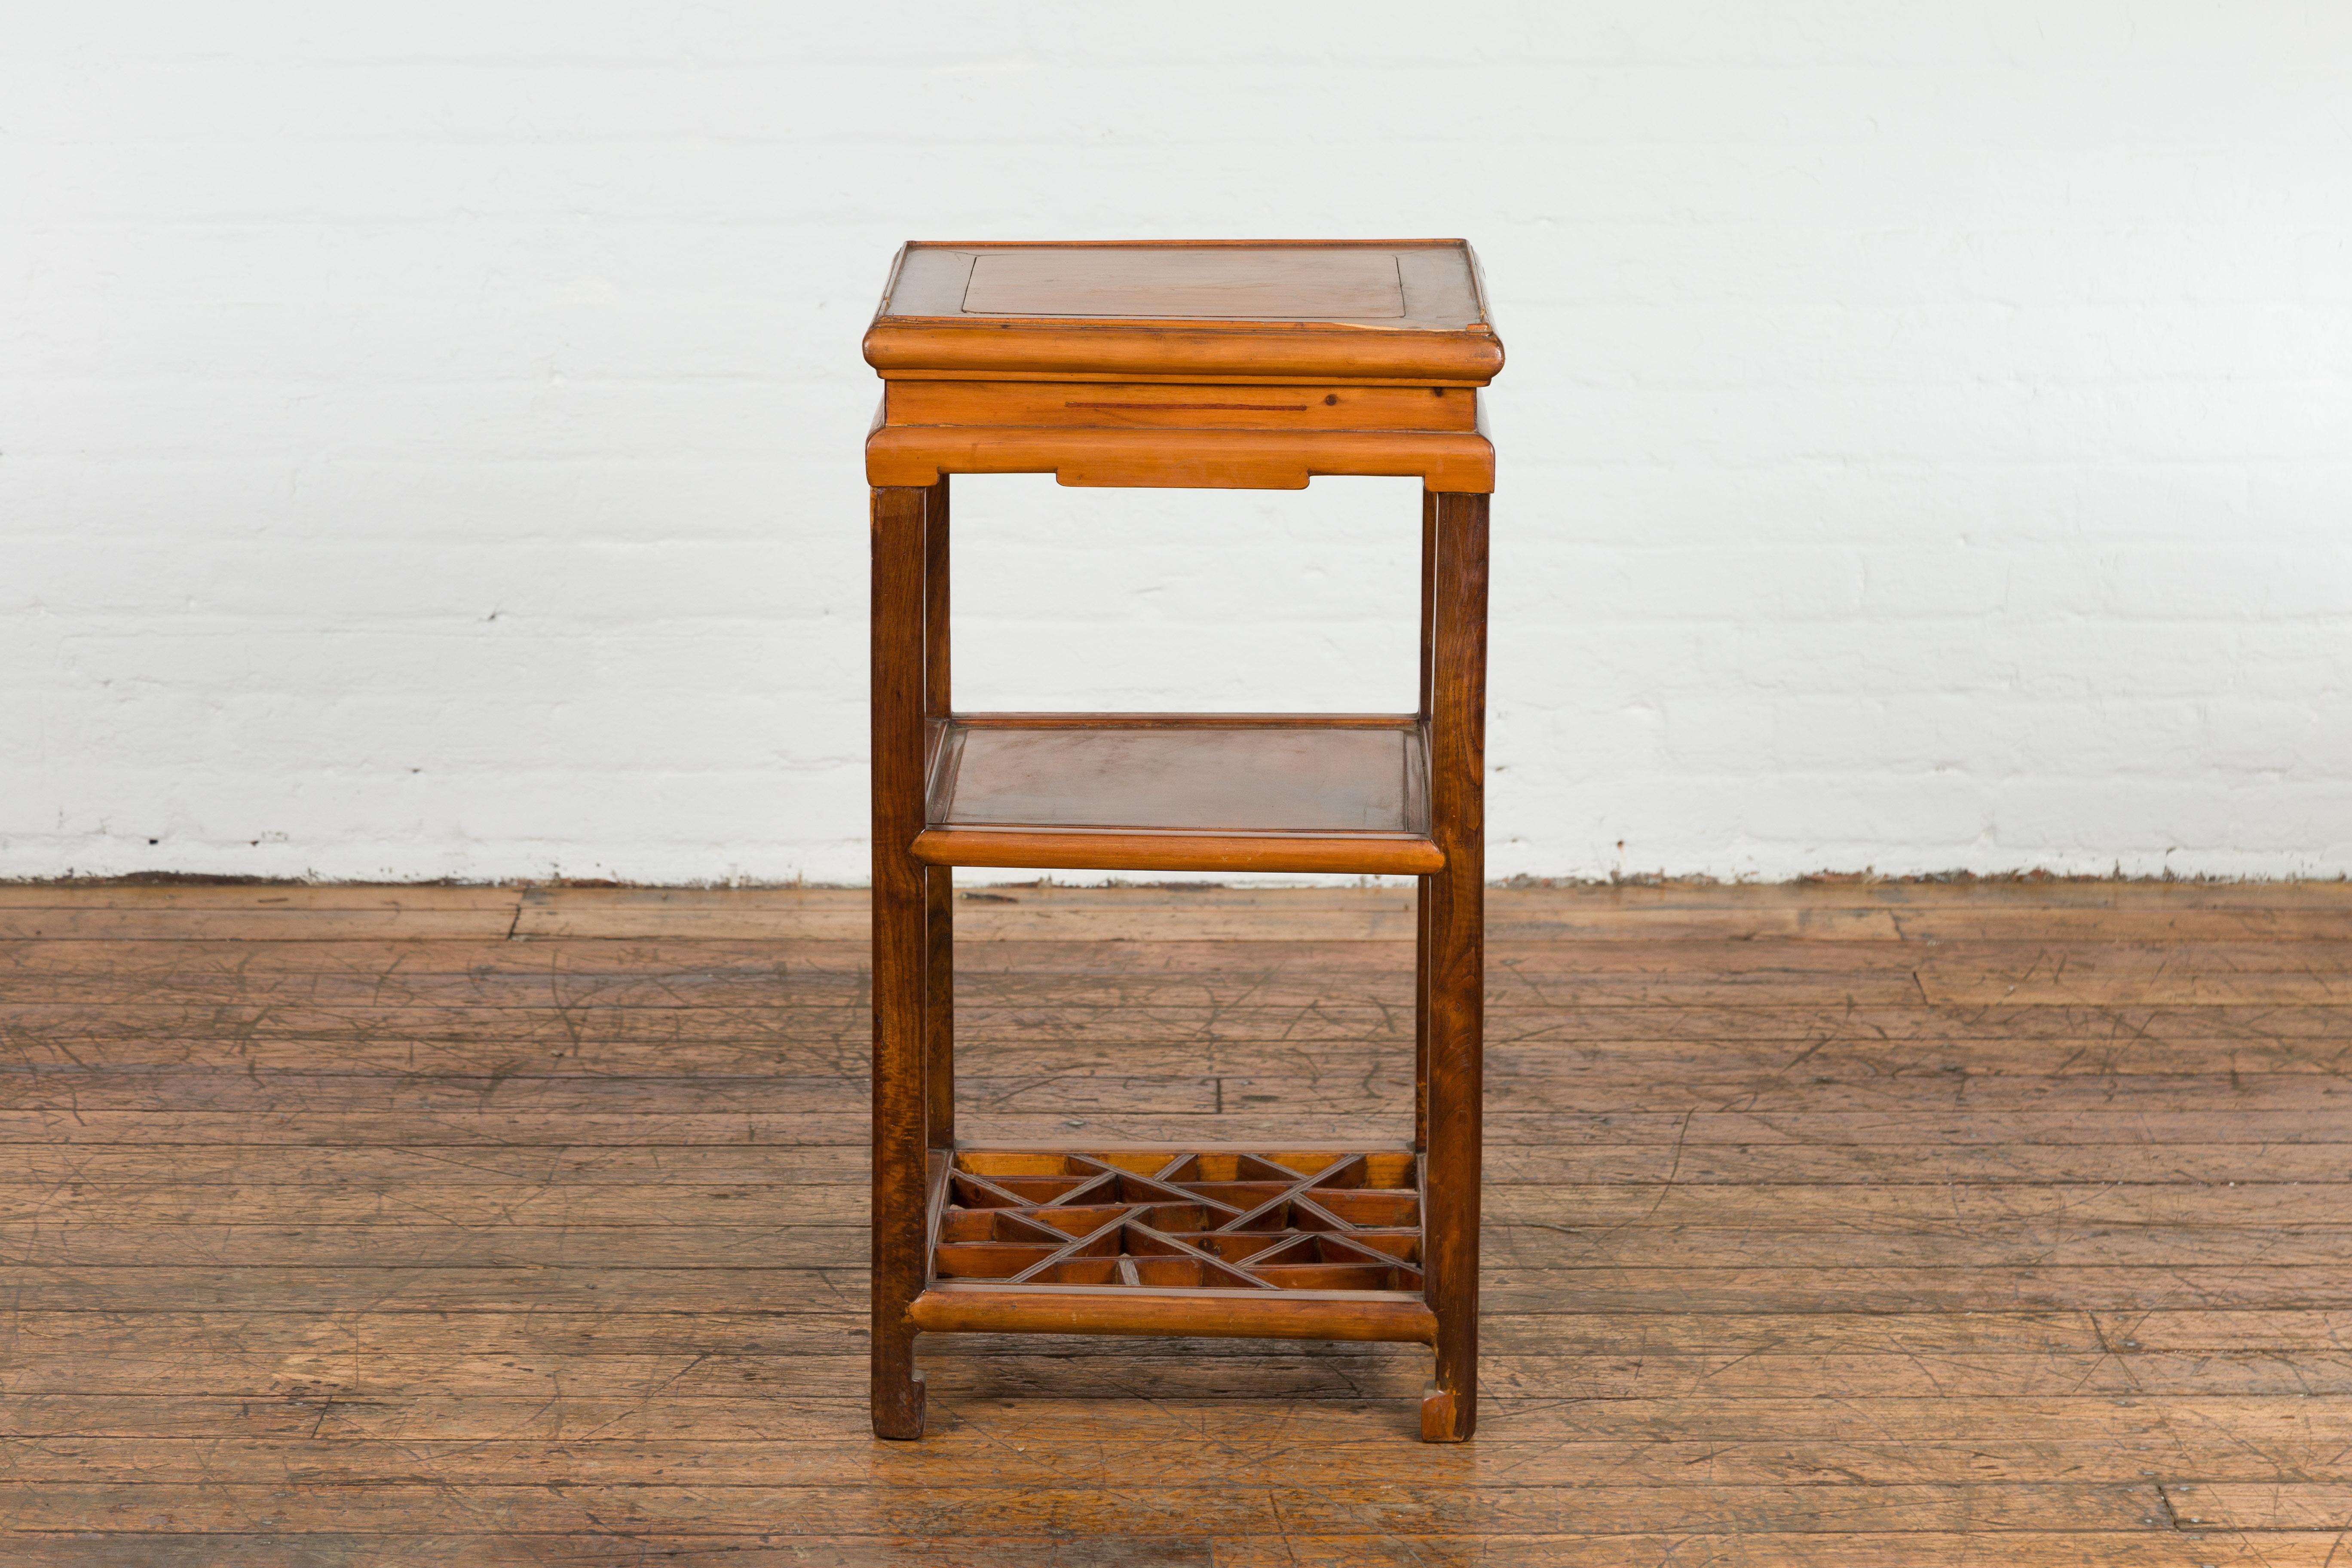 Late Qing Dynasty Side Table with Low Geometric Style Shelf For Sale 7